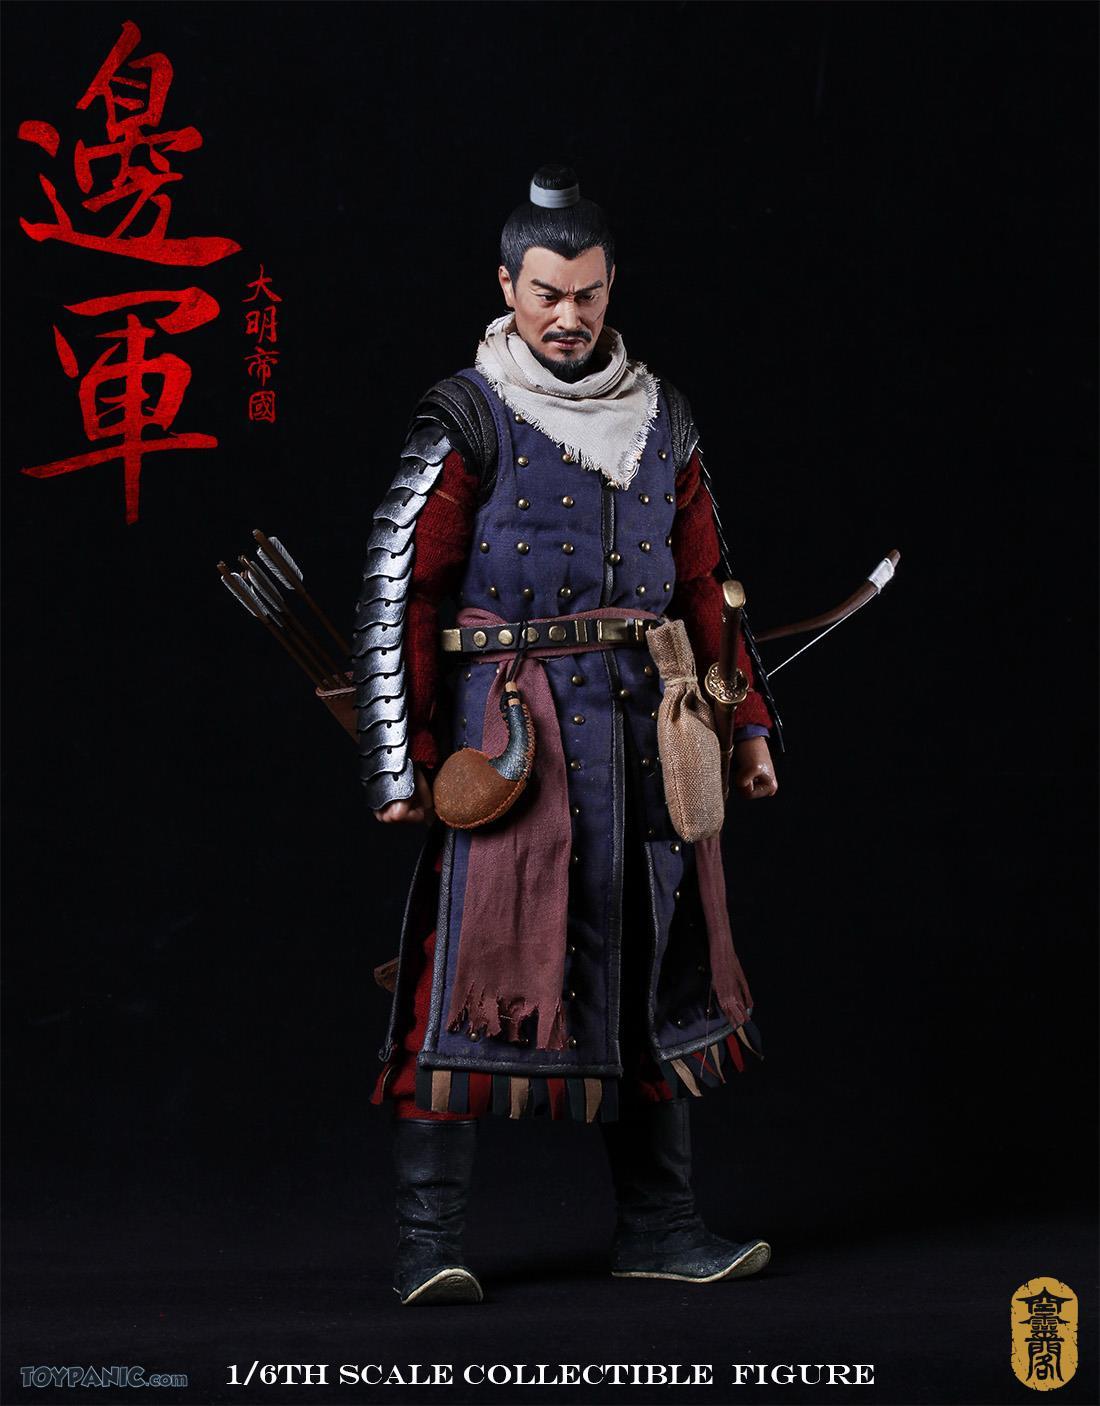 Male - NEW PRODUCT: Sonder: 1/6 Song Dynasty Series-Yue Jiaxing Yang Zaixing Action Figure (SD005#) 1223201650535PM_35